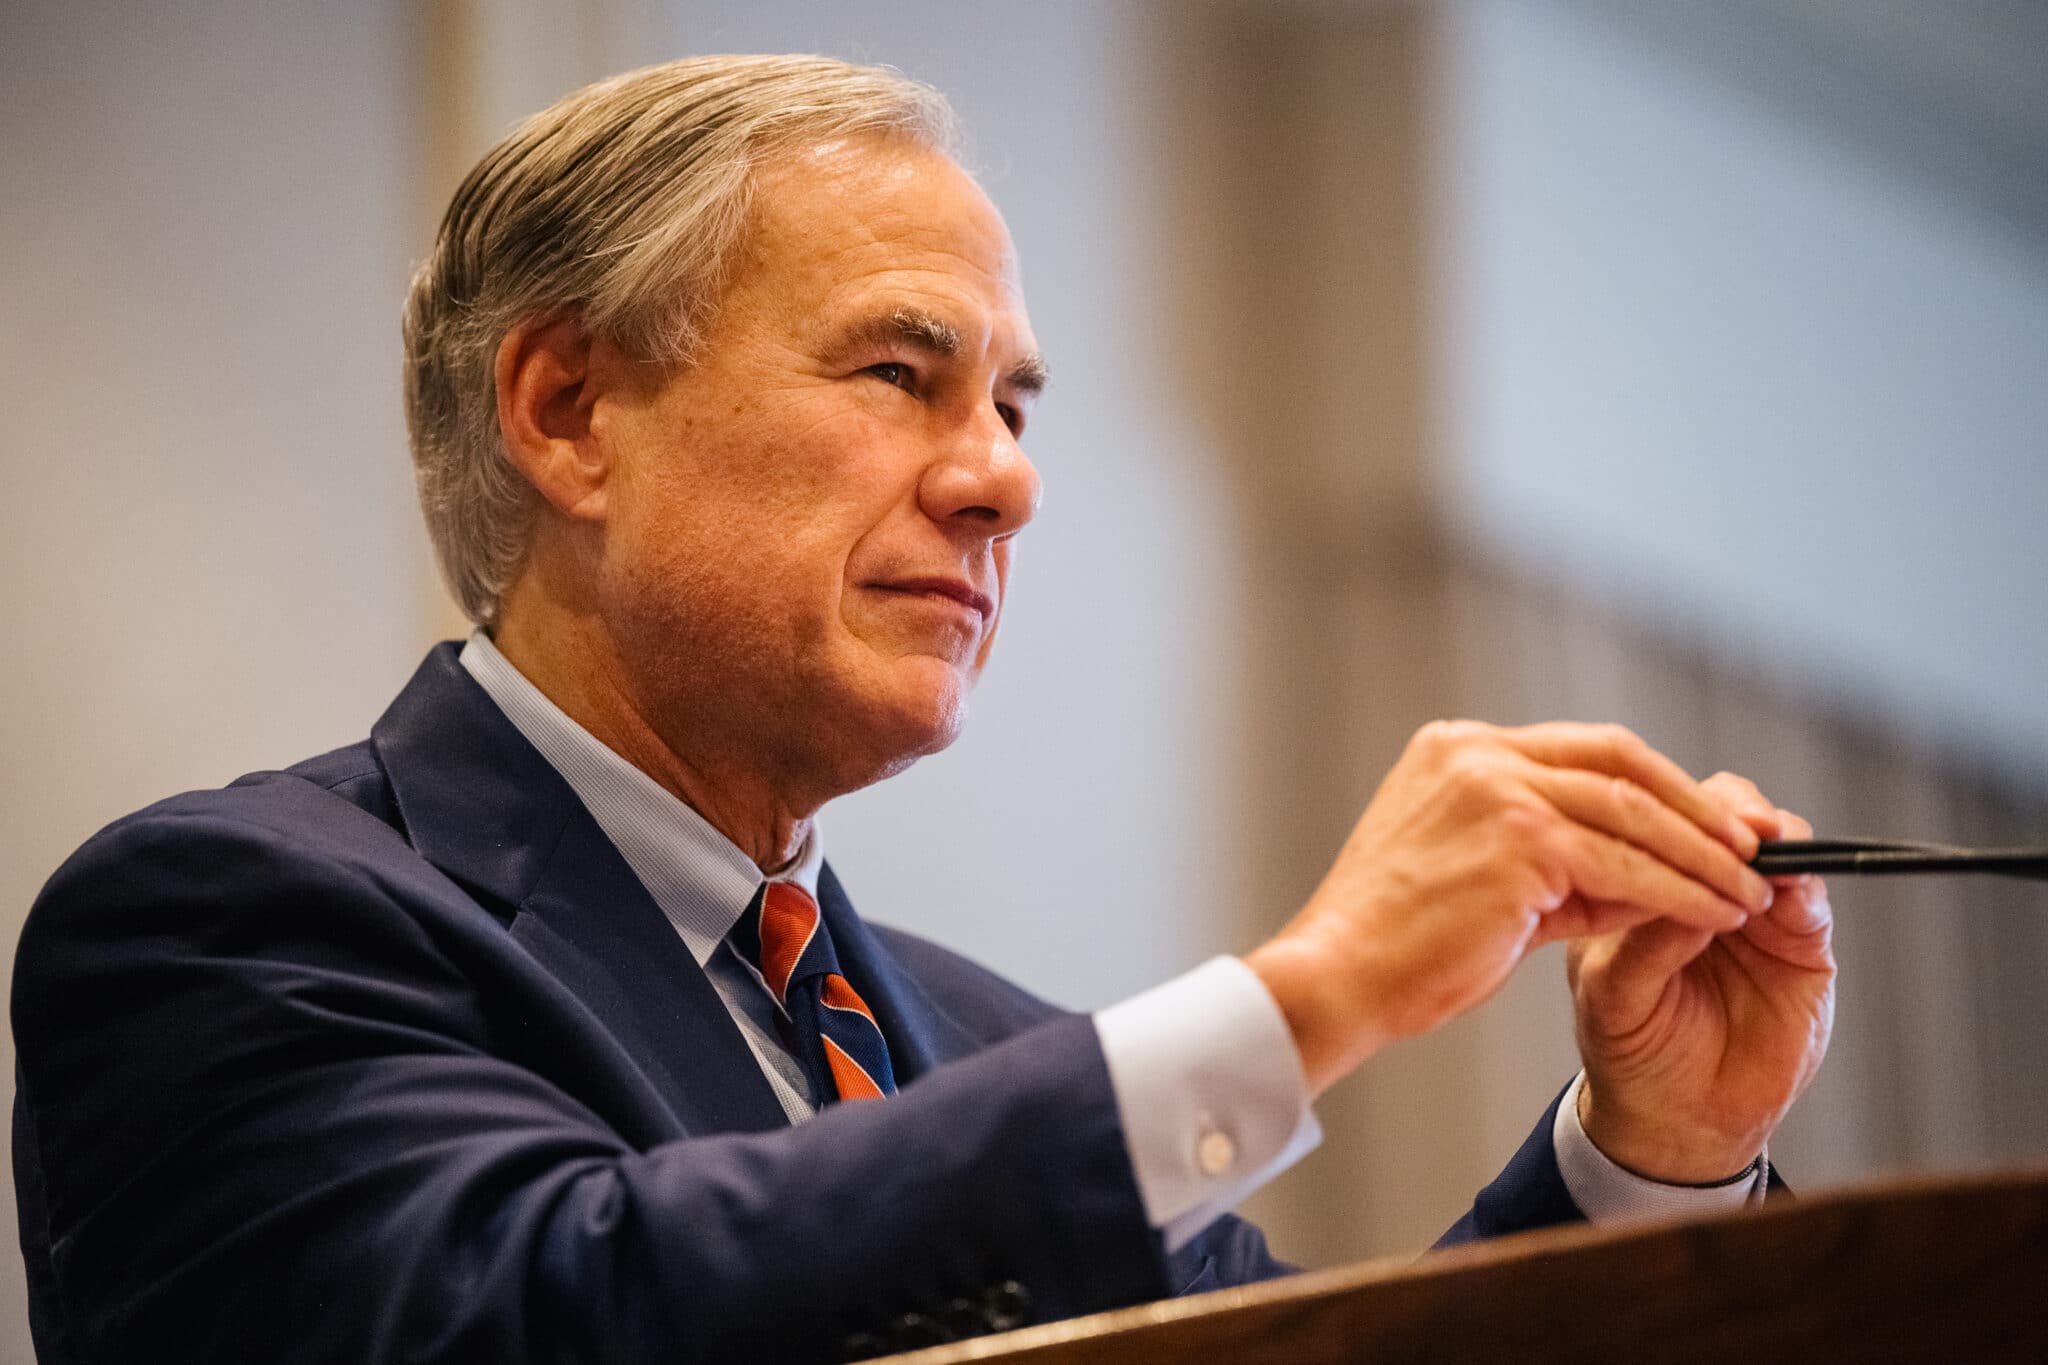 More than 60 businesses have demanded Texas Governor Greg Abbott drop his 'discriminatory' trans policy